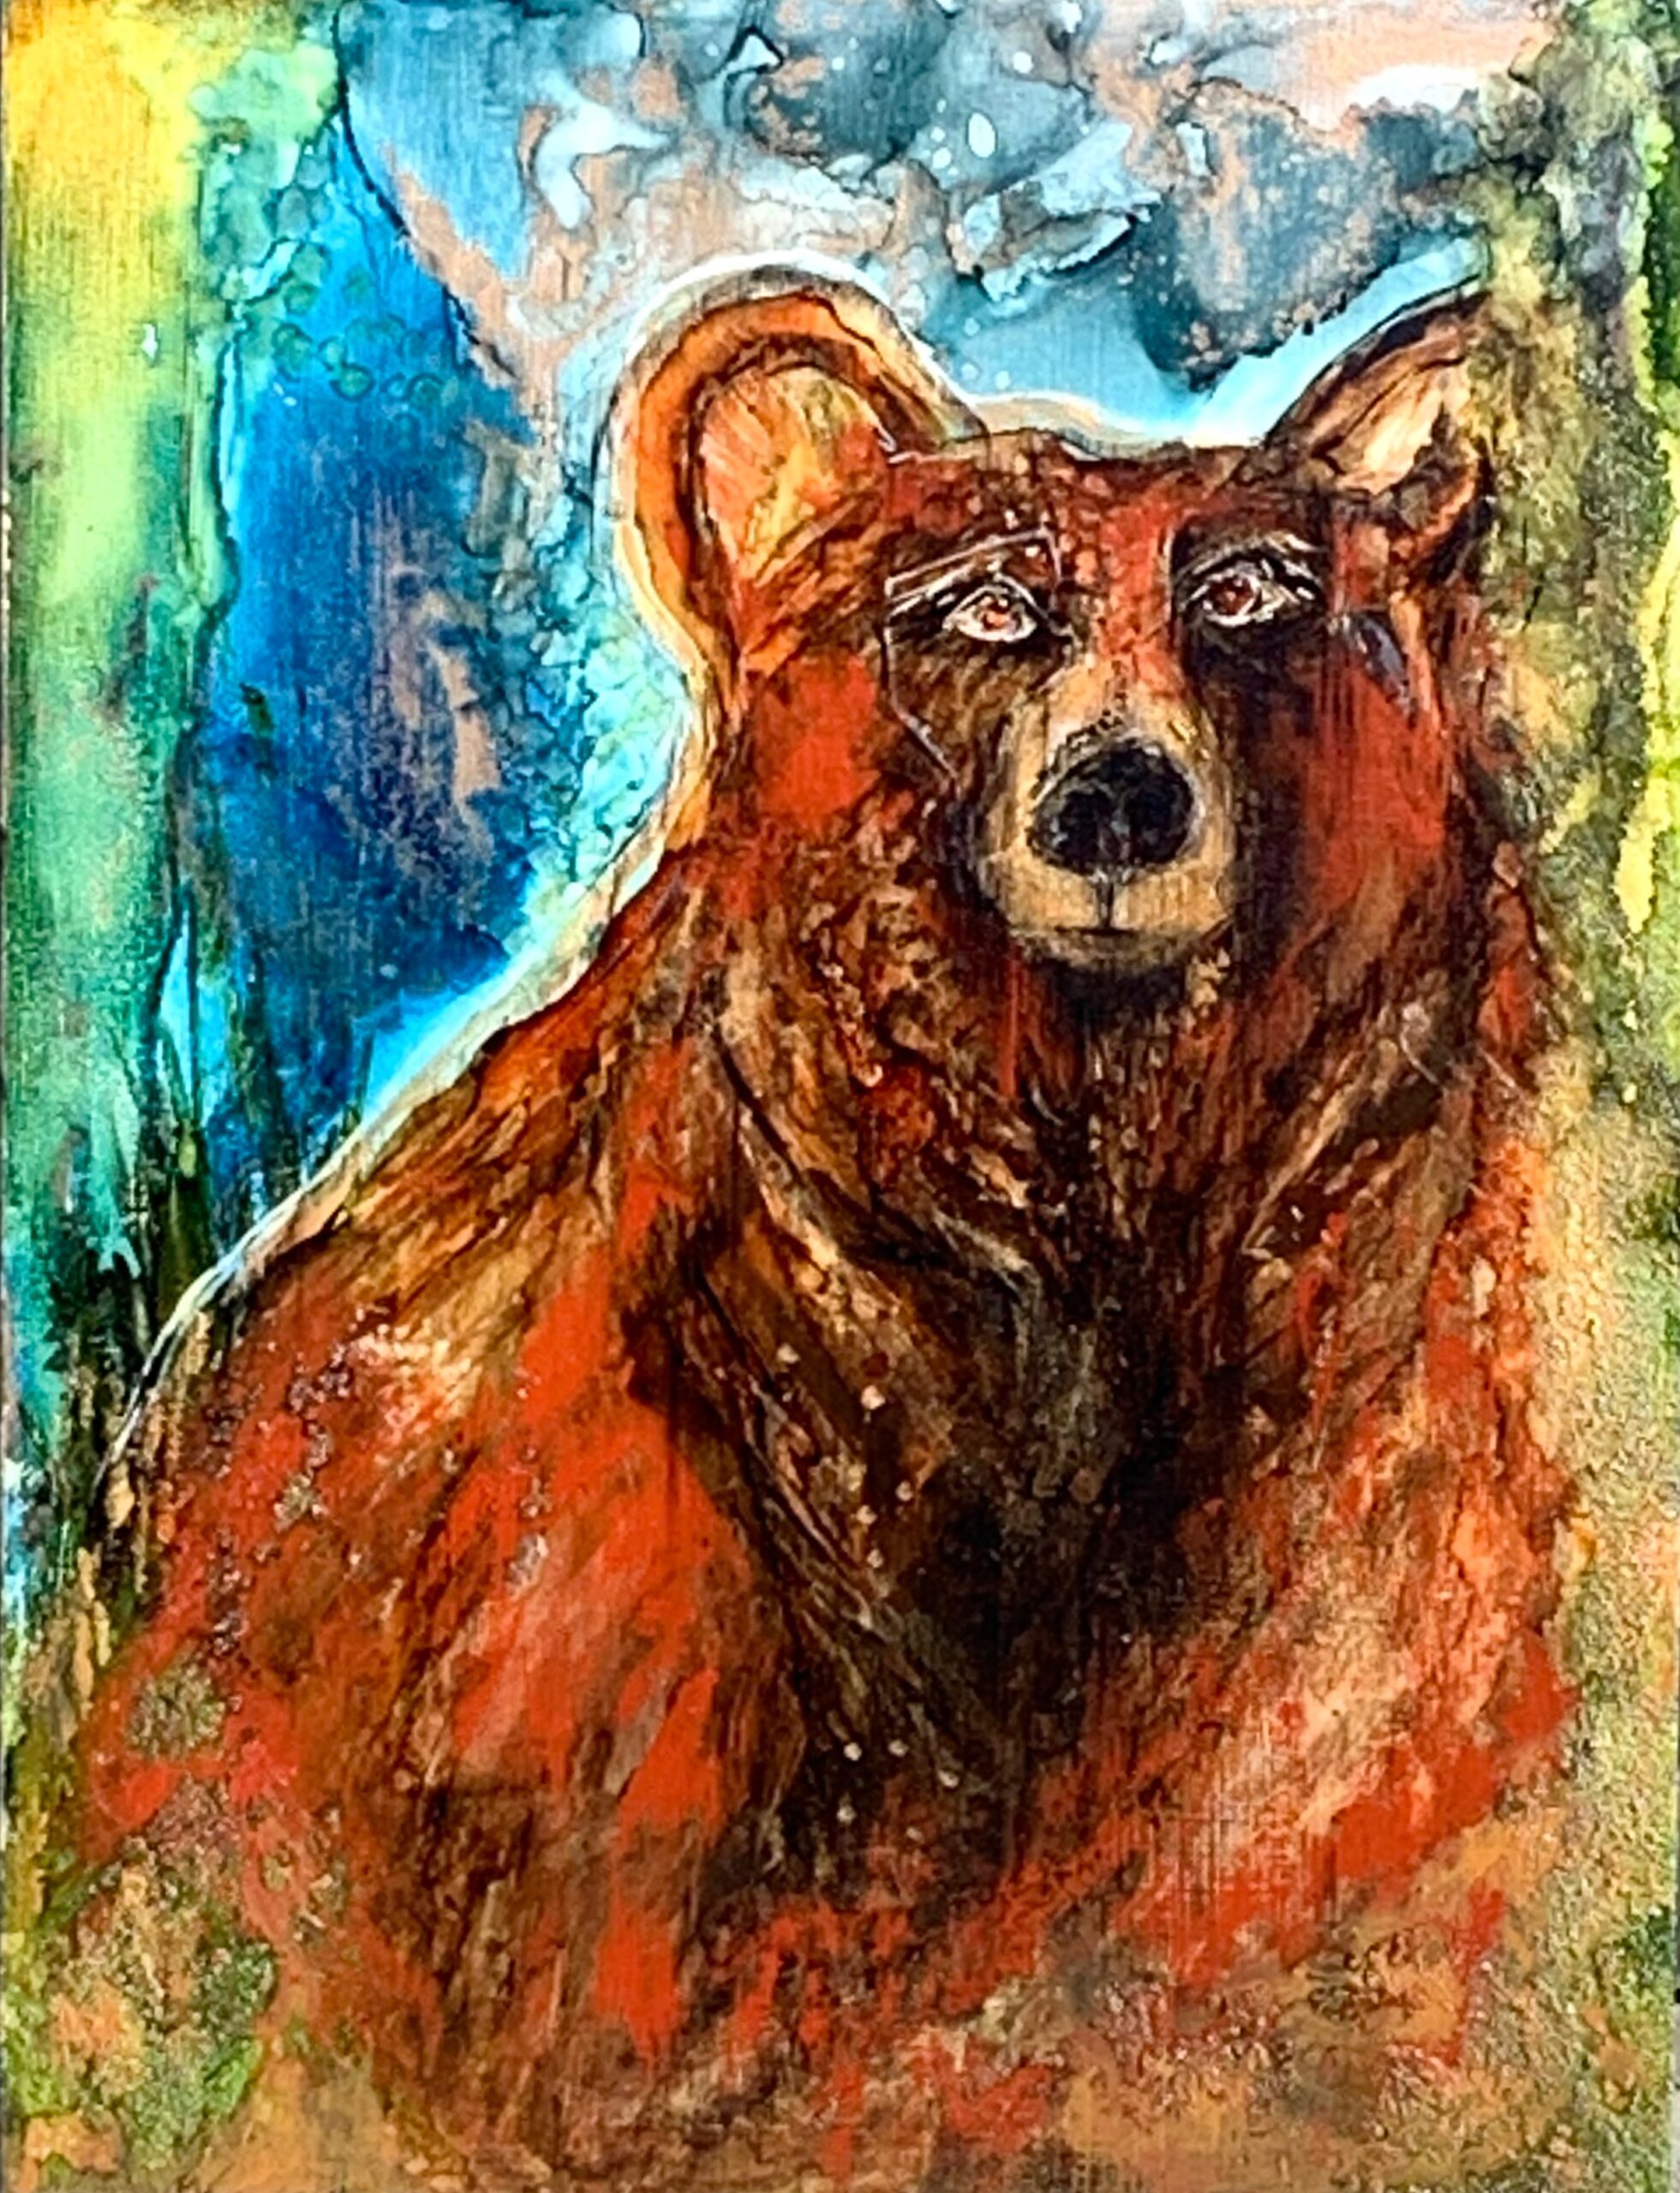 Alcohol ink painting of a friendly brown bear in the forest by Paulina Tokarski.